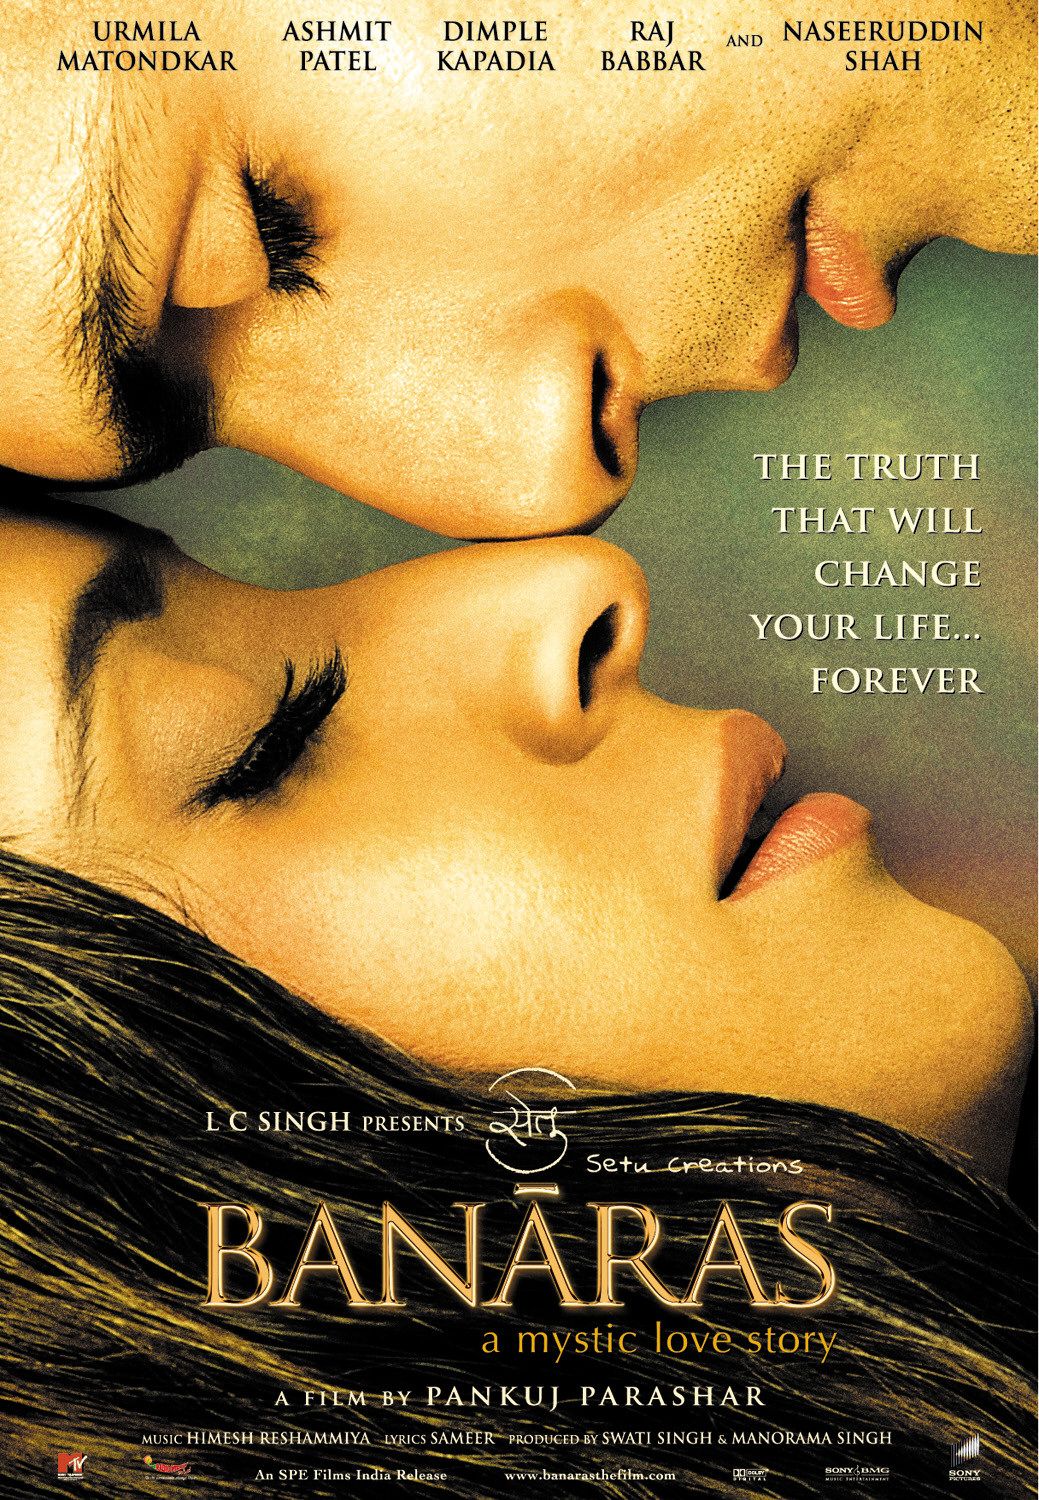 Banaras-A Mystic Love Story Movie: Review | Release Date | Songs